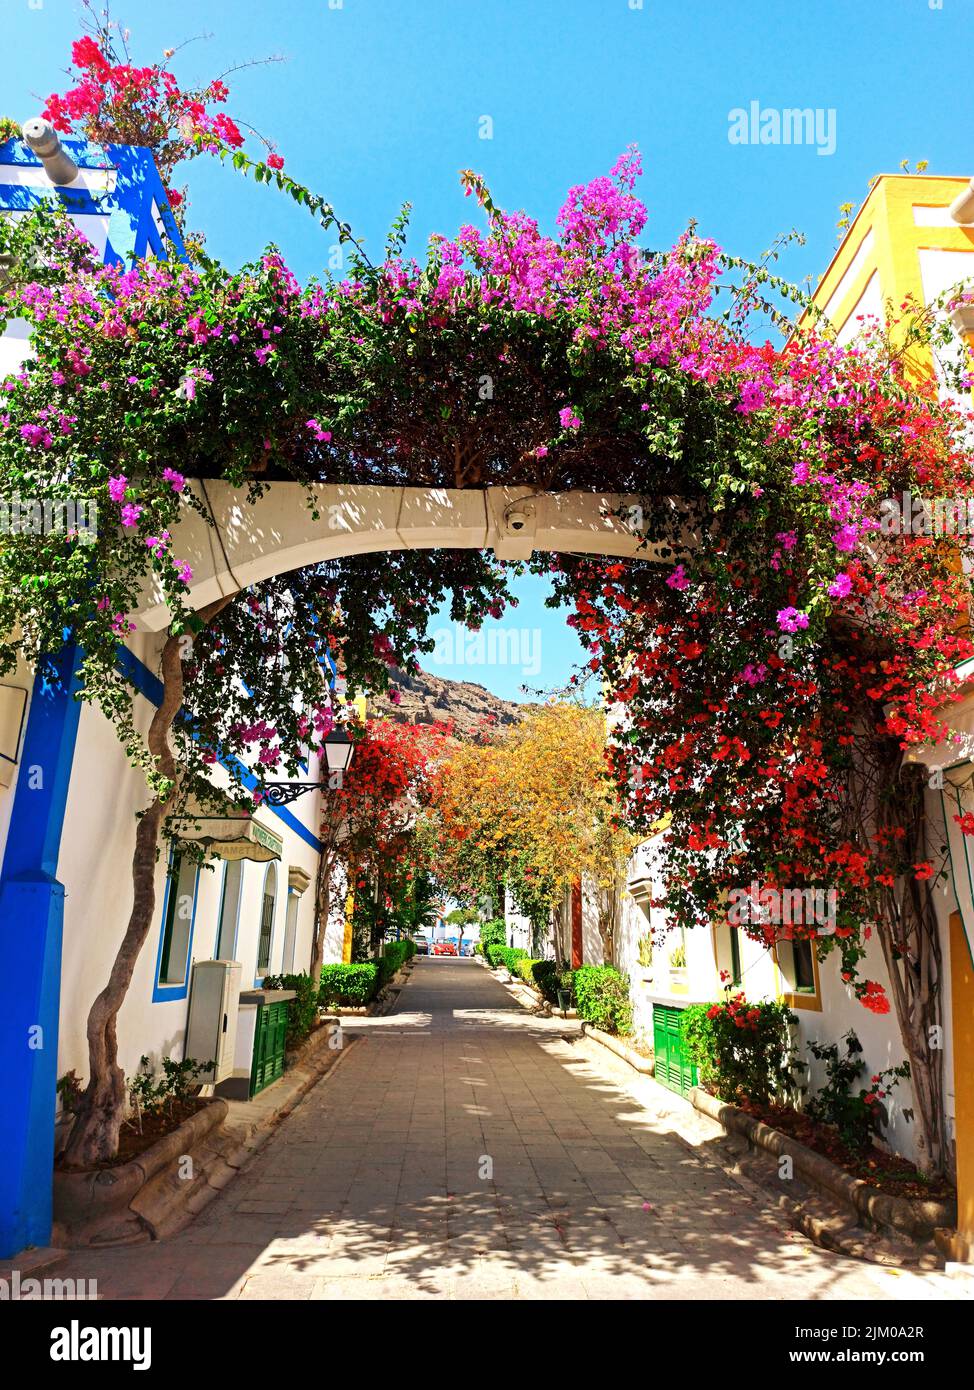 The beautiful arches decorated with flowers on the narrow street Stock Photo